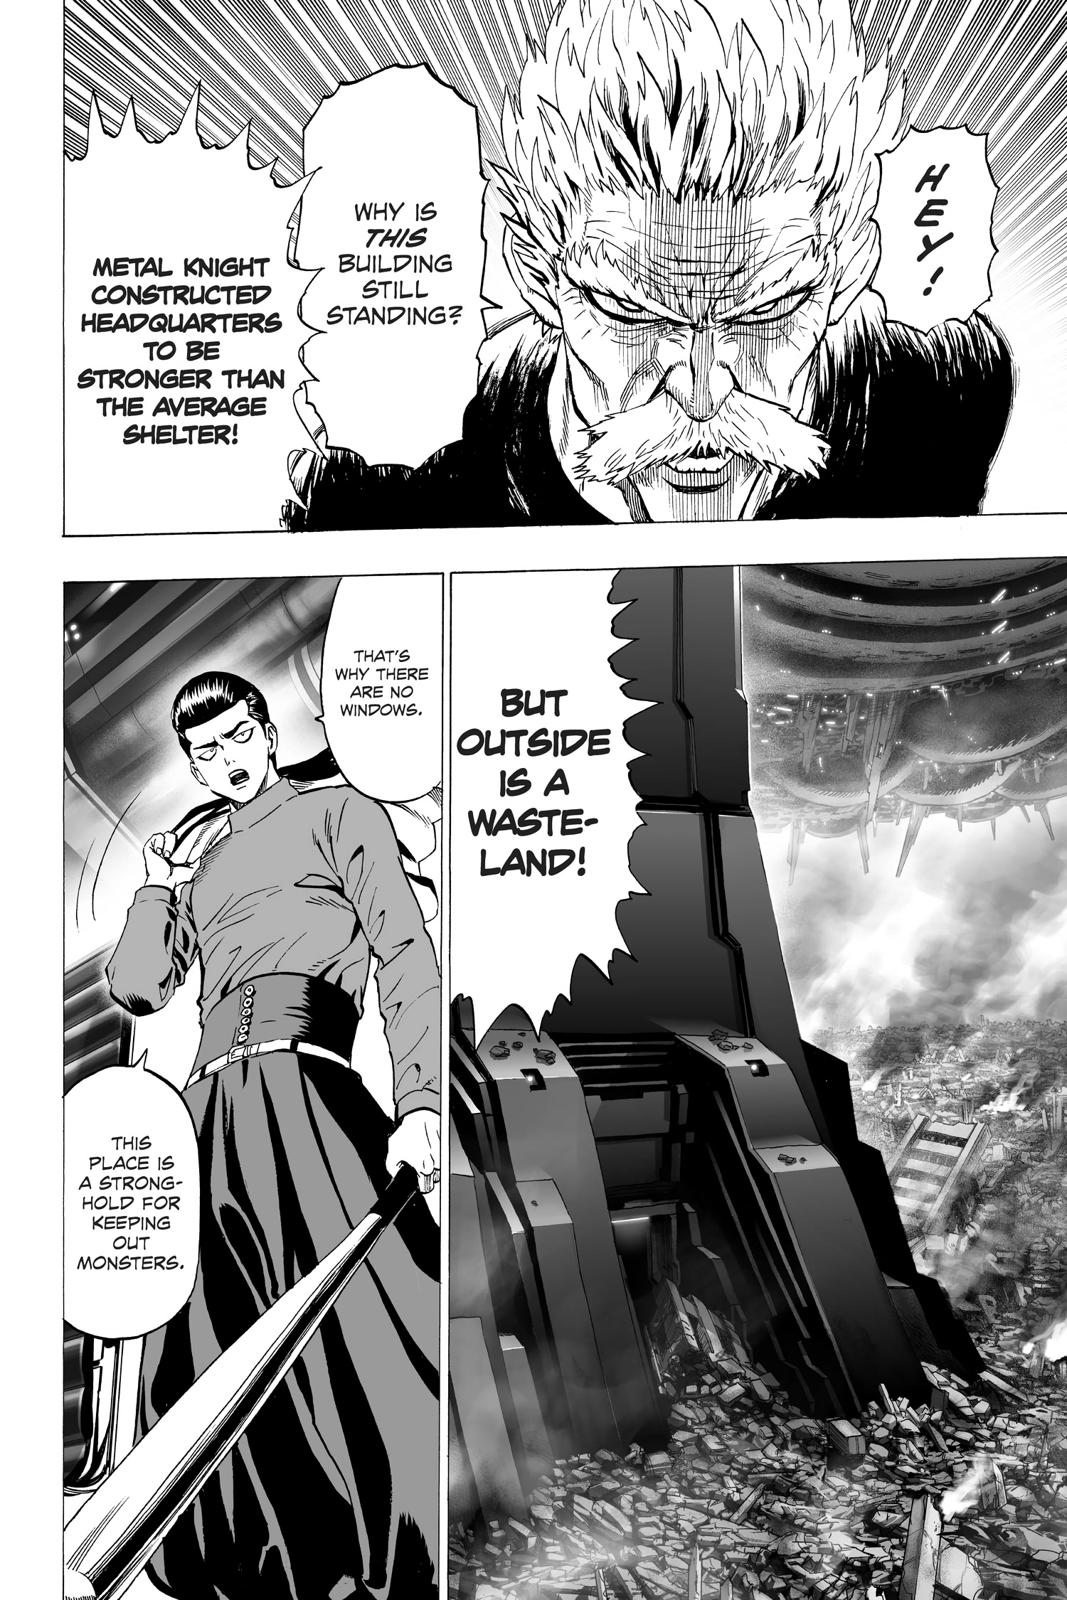 One-Punch Man, Punch 32 image 14